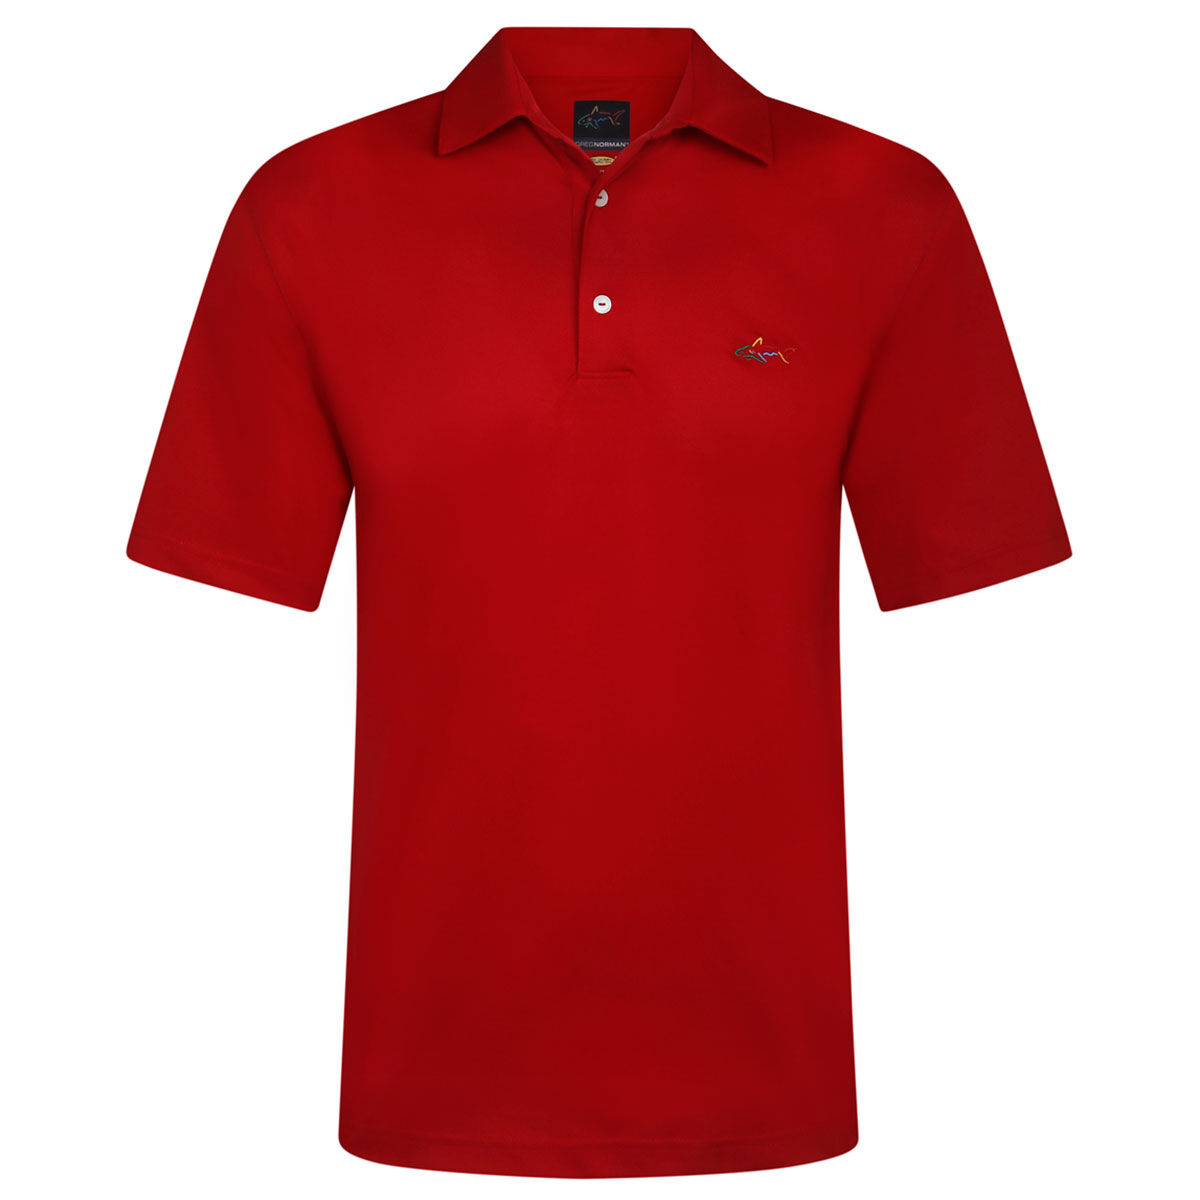 Greg Norman Red Embroidered Shark Logo Golf Polo Shirt, Mens | American Golf, Size: Small